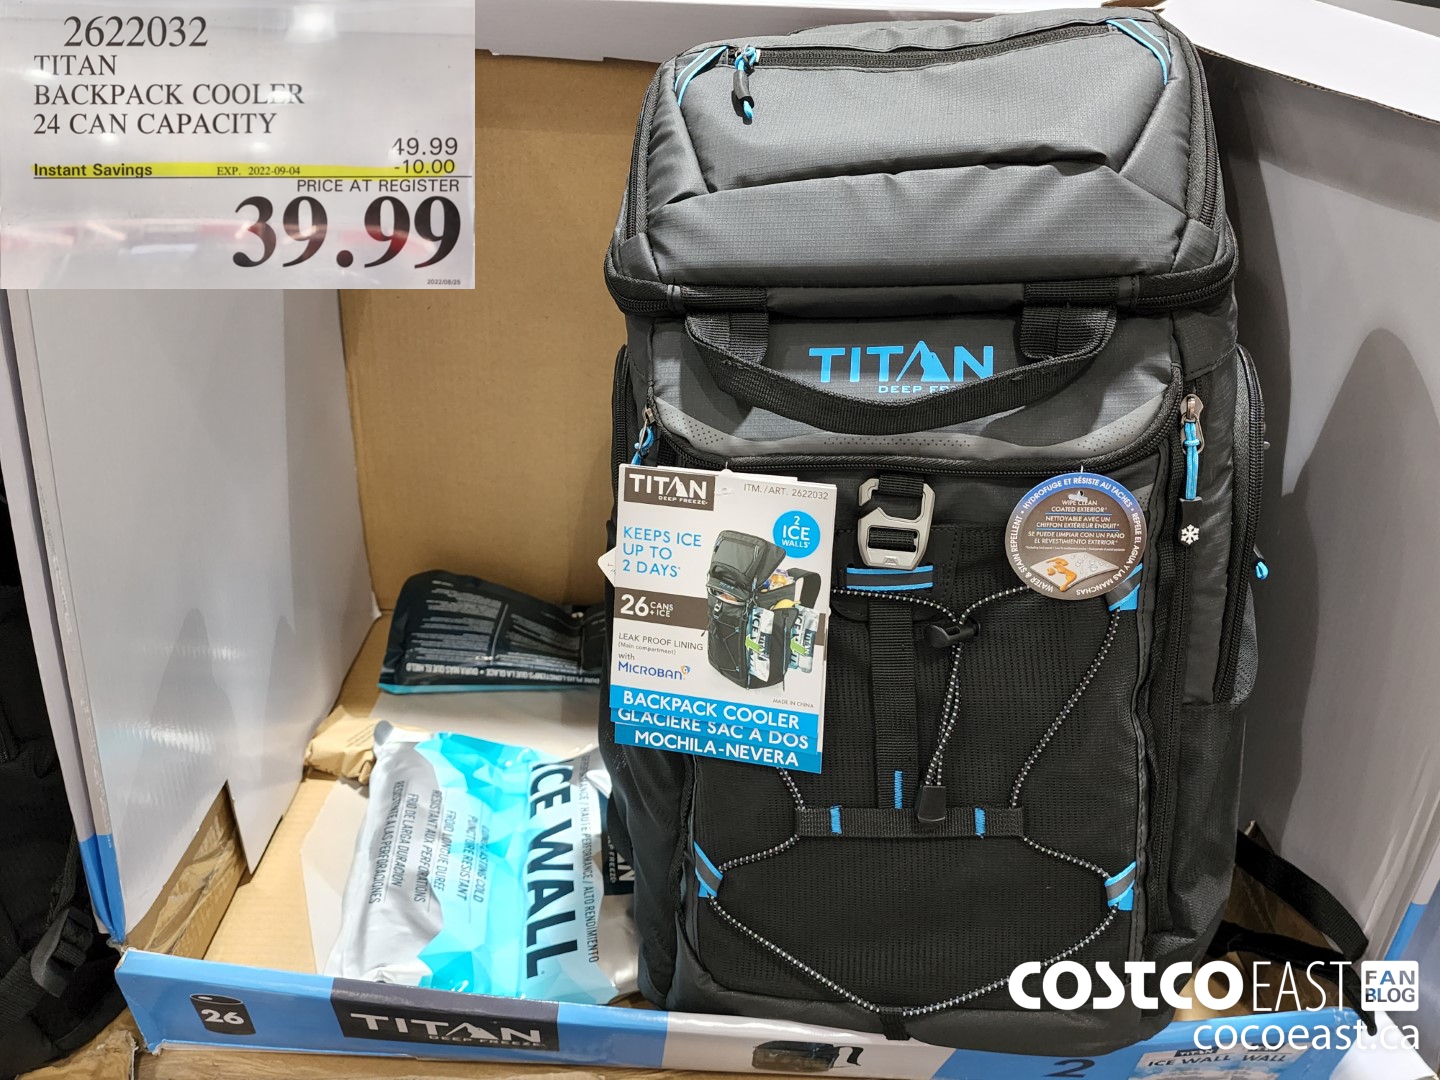 2622032 TITAN BACKPACK COOLER 24 CAN CAPACITY 10 00 INSTANT SAVINGS EXPIRES  ON 2022 09 04 39 99 - Costco East Fan Blog